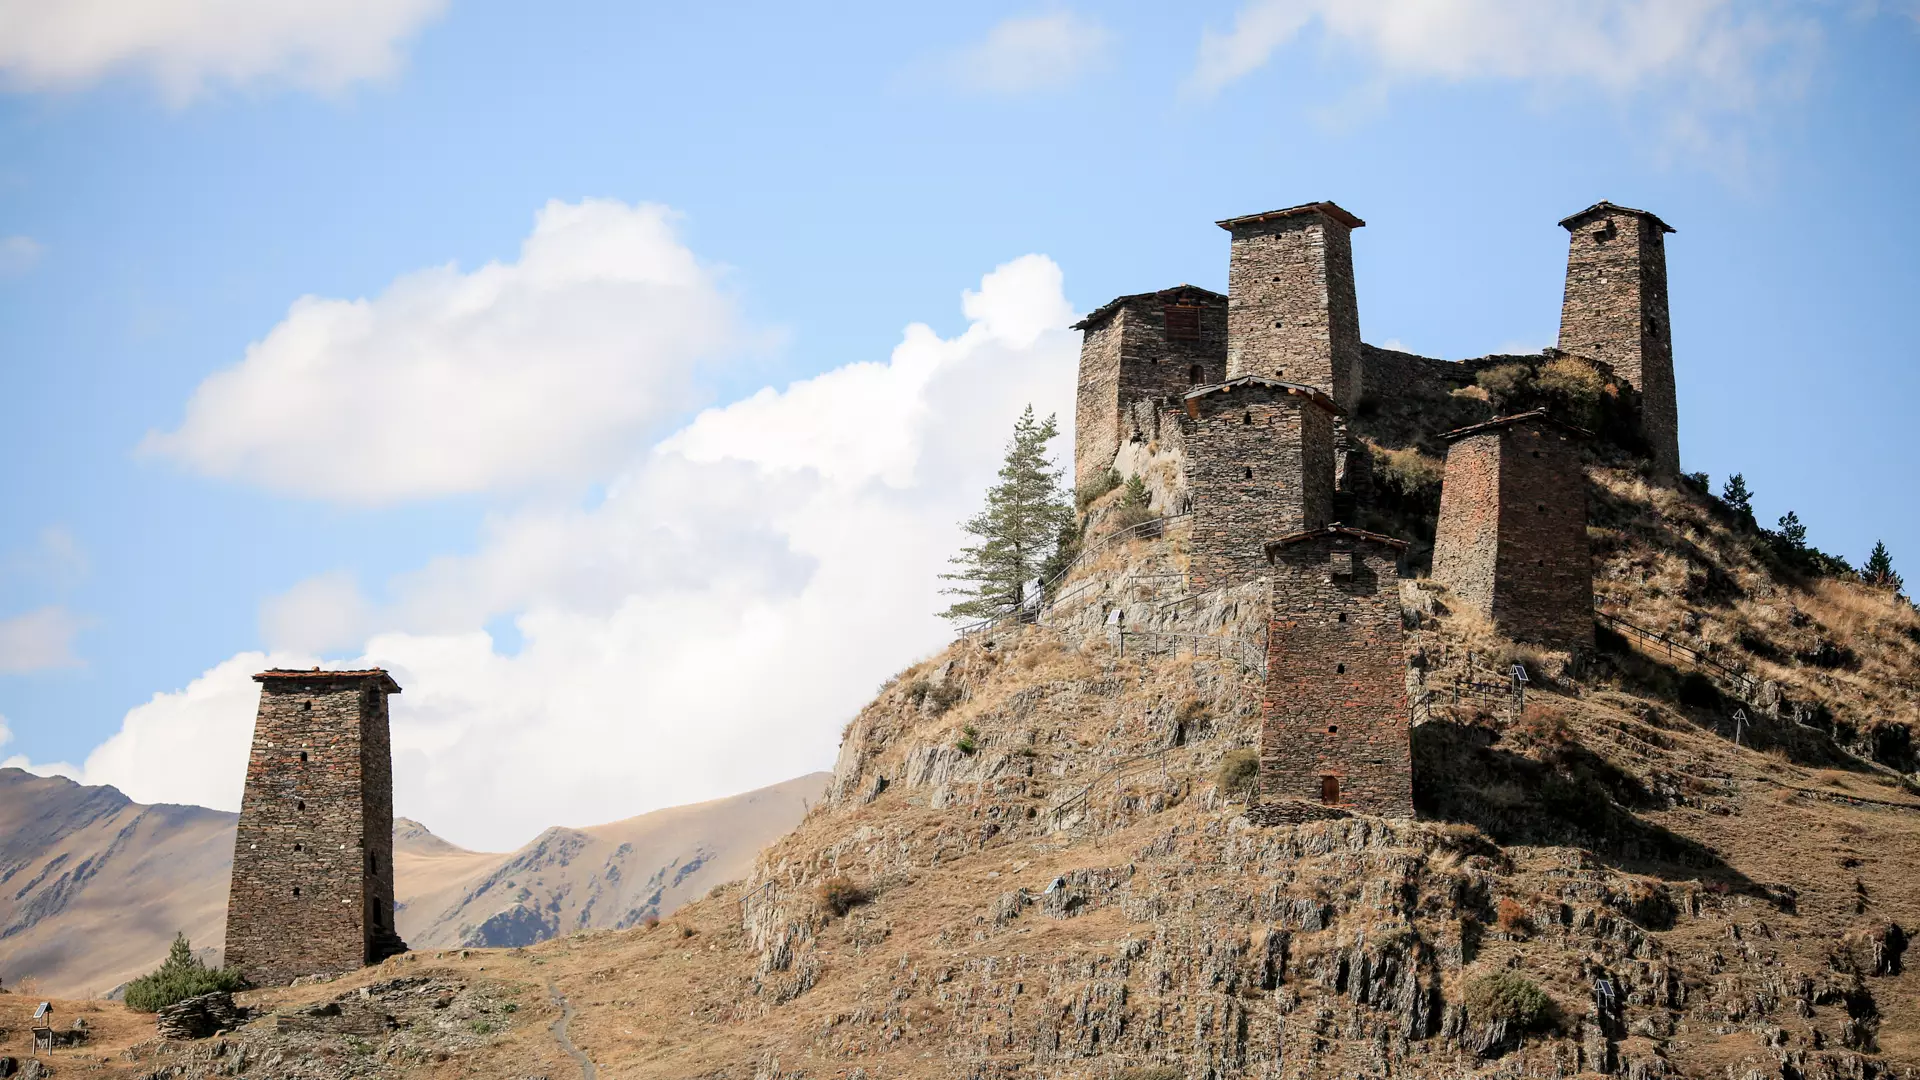 Keselo Fortress - a Prominent Example of Tusheti’s Architecture